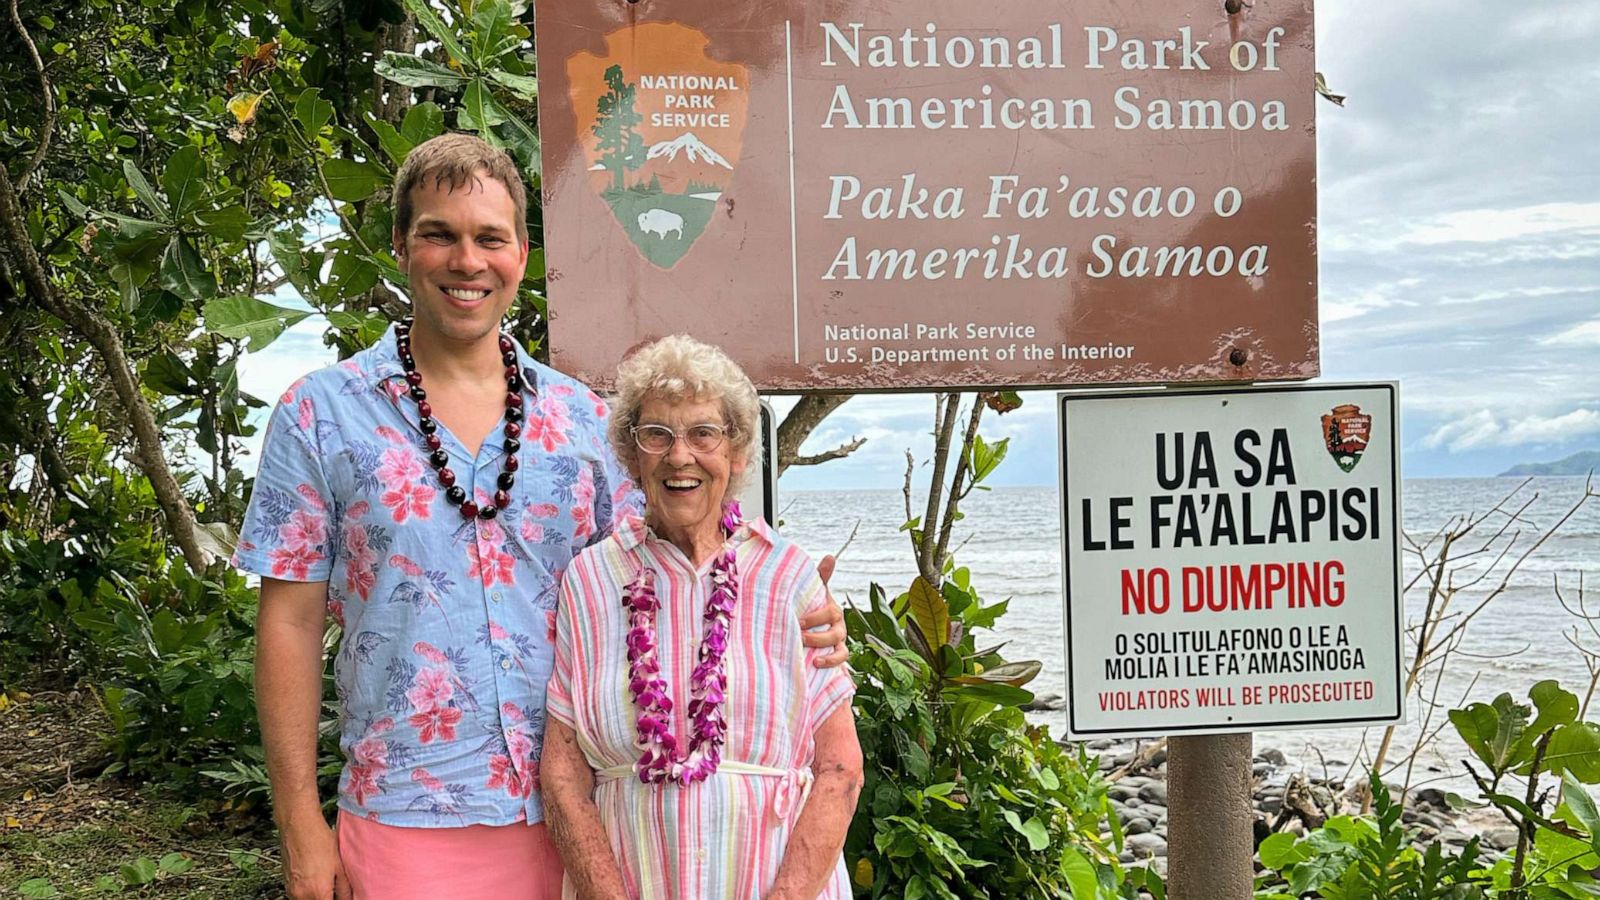 93-year-old Grandmother And Her Grandson Finish Quest To Visit All 63 US National Parks